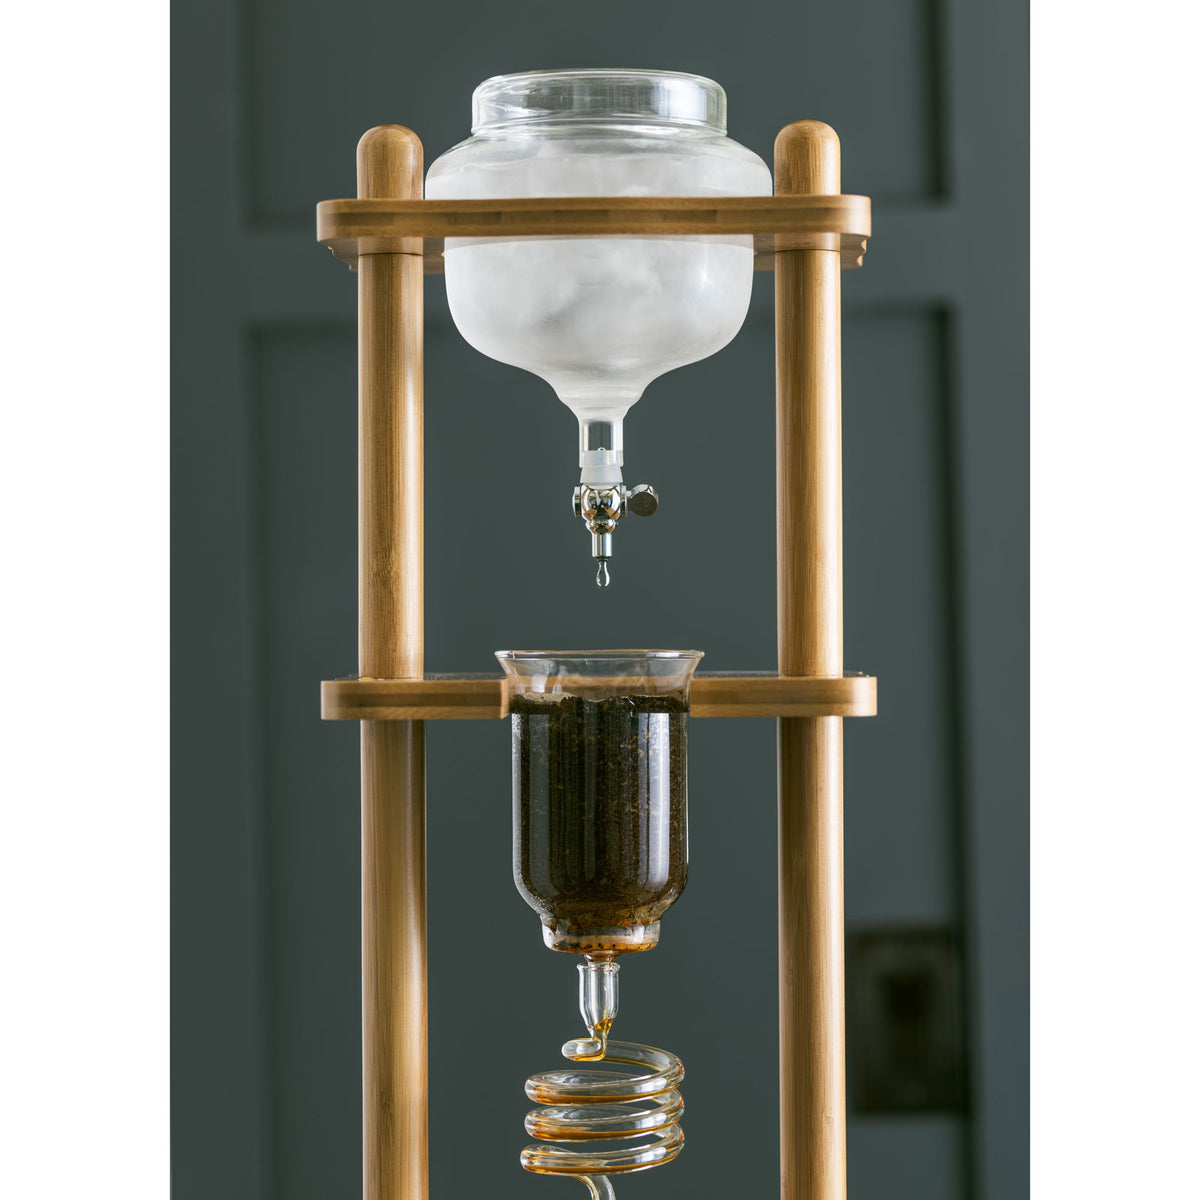 JOYDING Iced Coffee Cold Brew Drip Tower 6-8 cup Coffee Maker